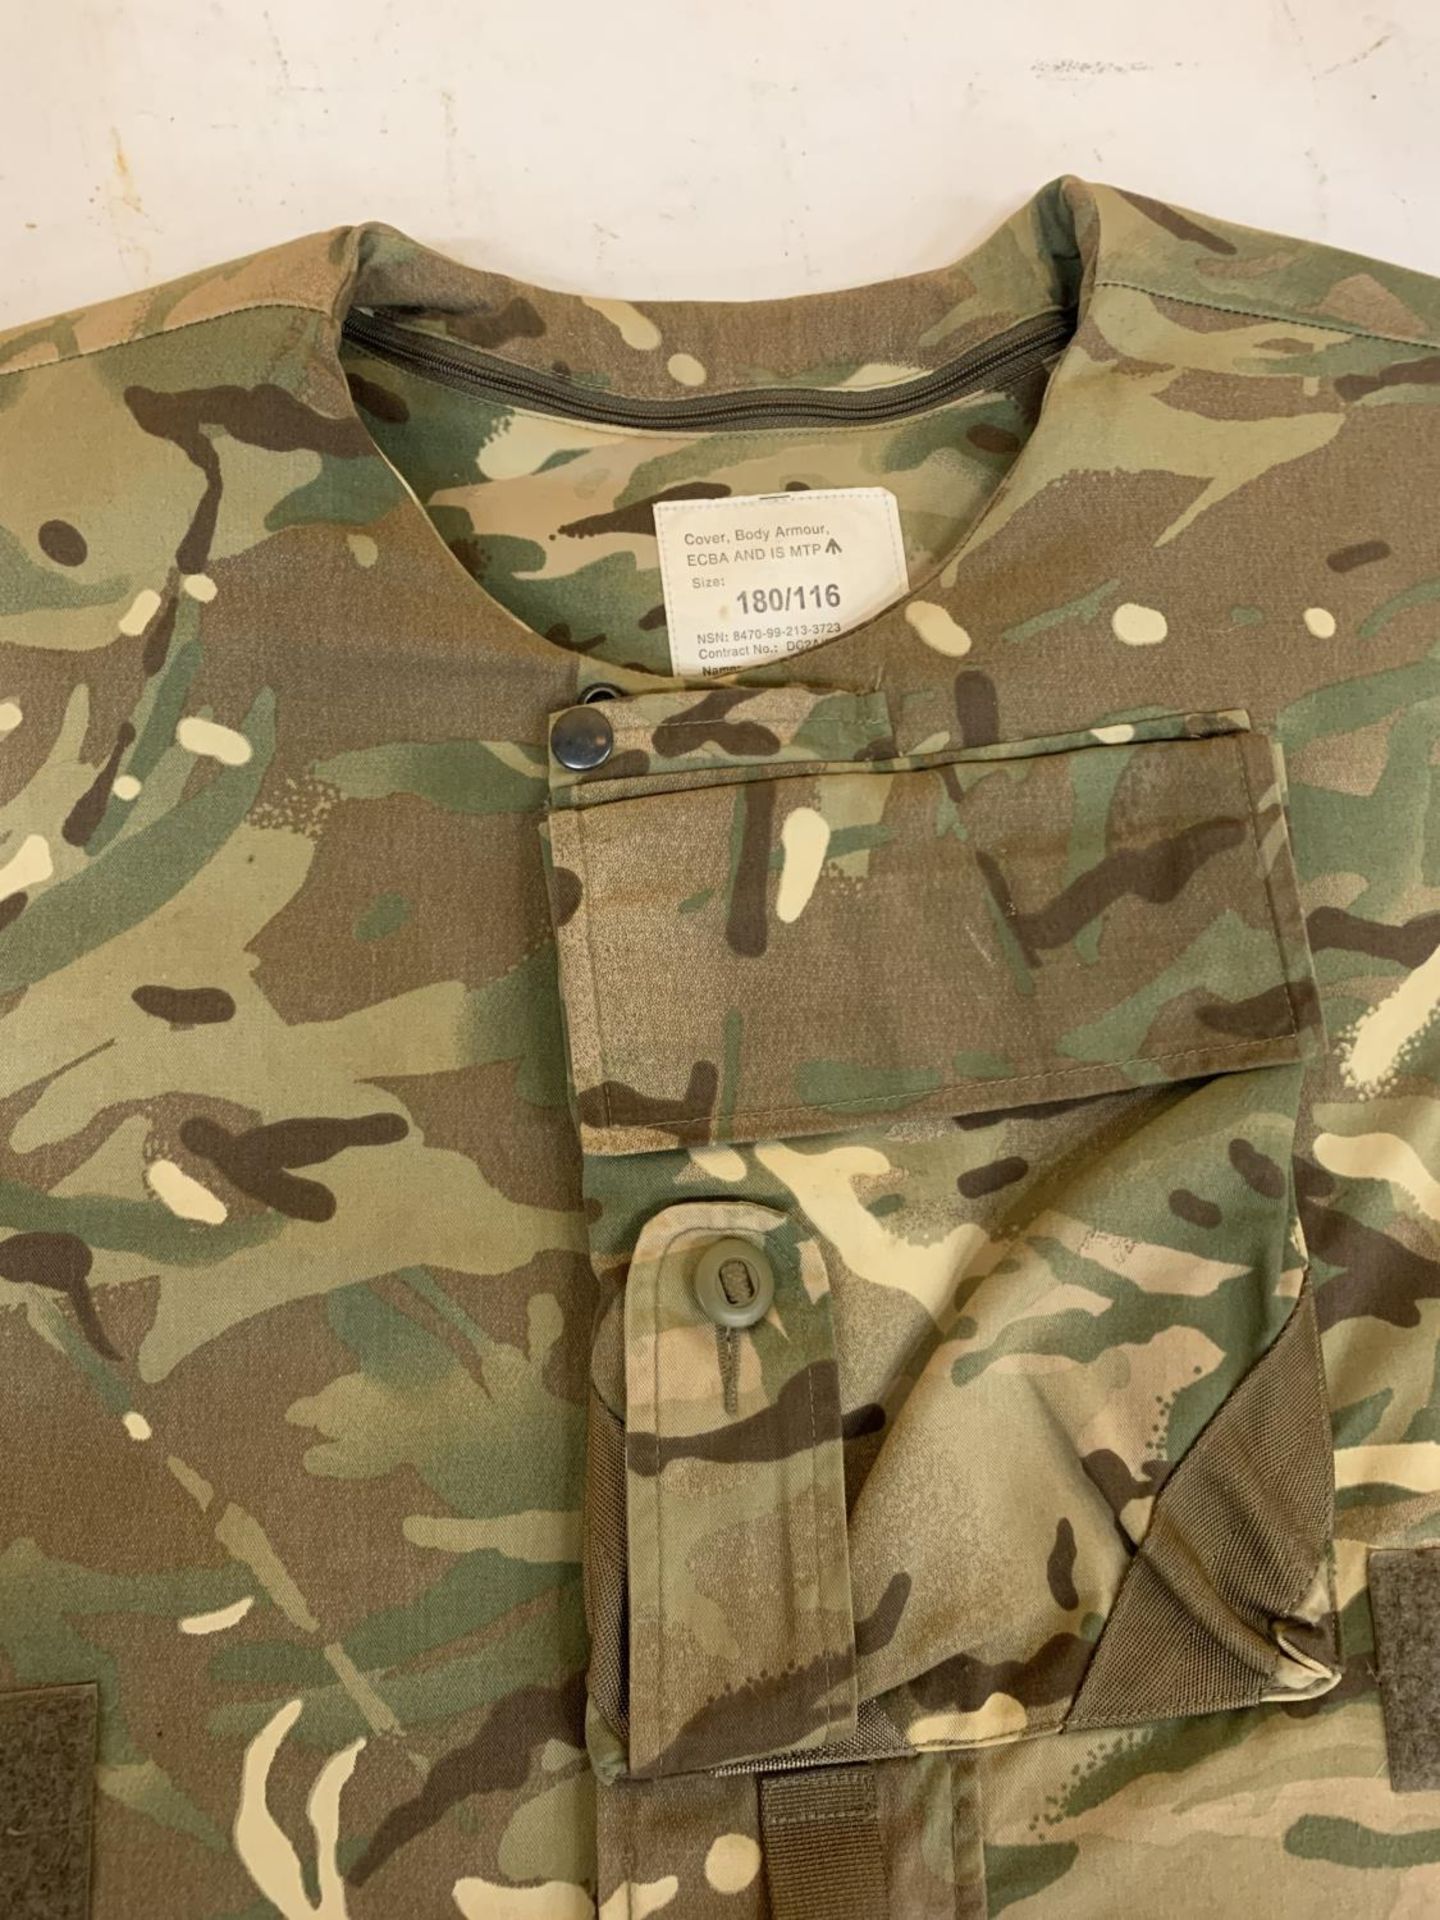 A CAMOUFLAGE BULLET PROOF VEST - Image 2 of 3